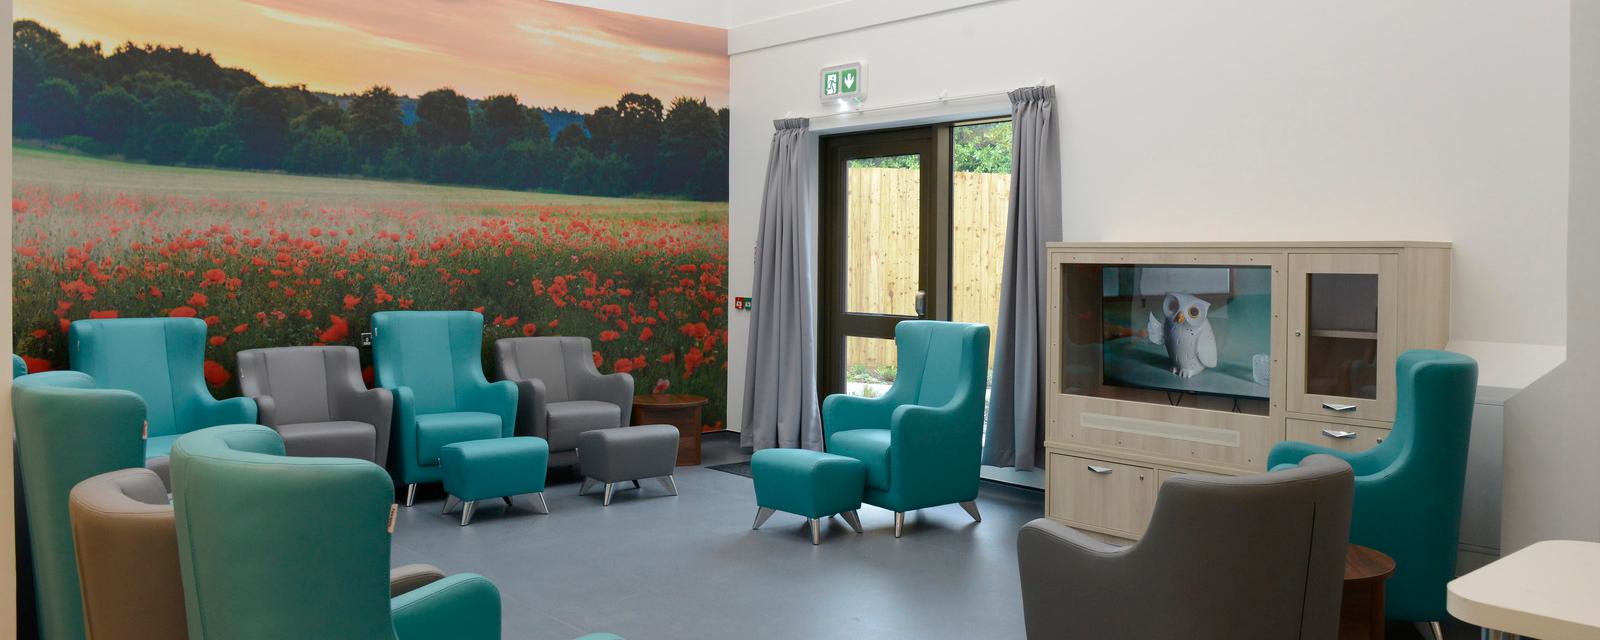 Ruby Ward - new lounge area with large photograph on wall with field full of poppies